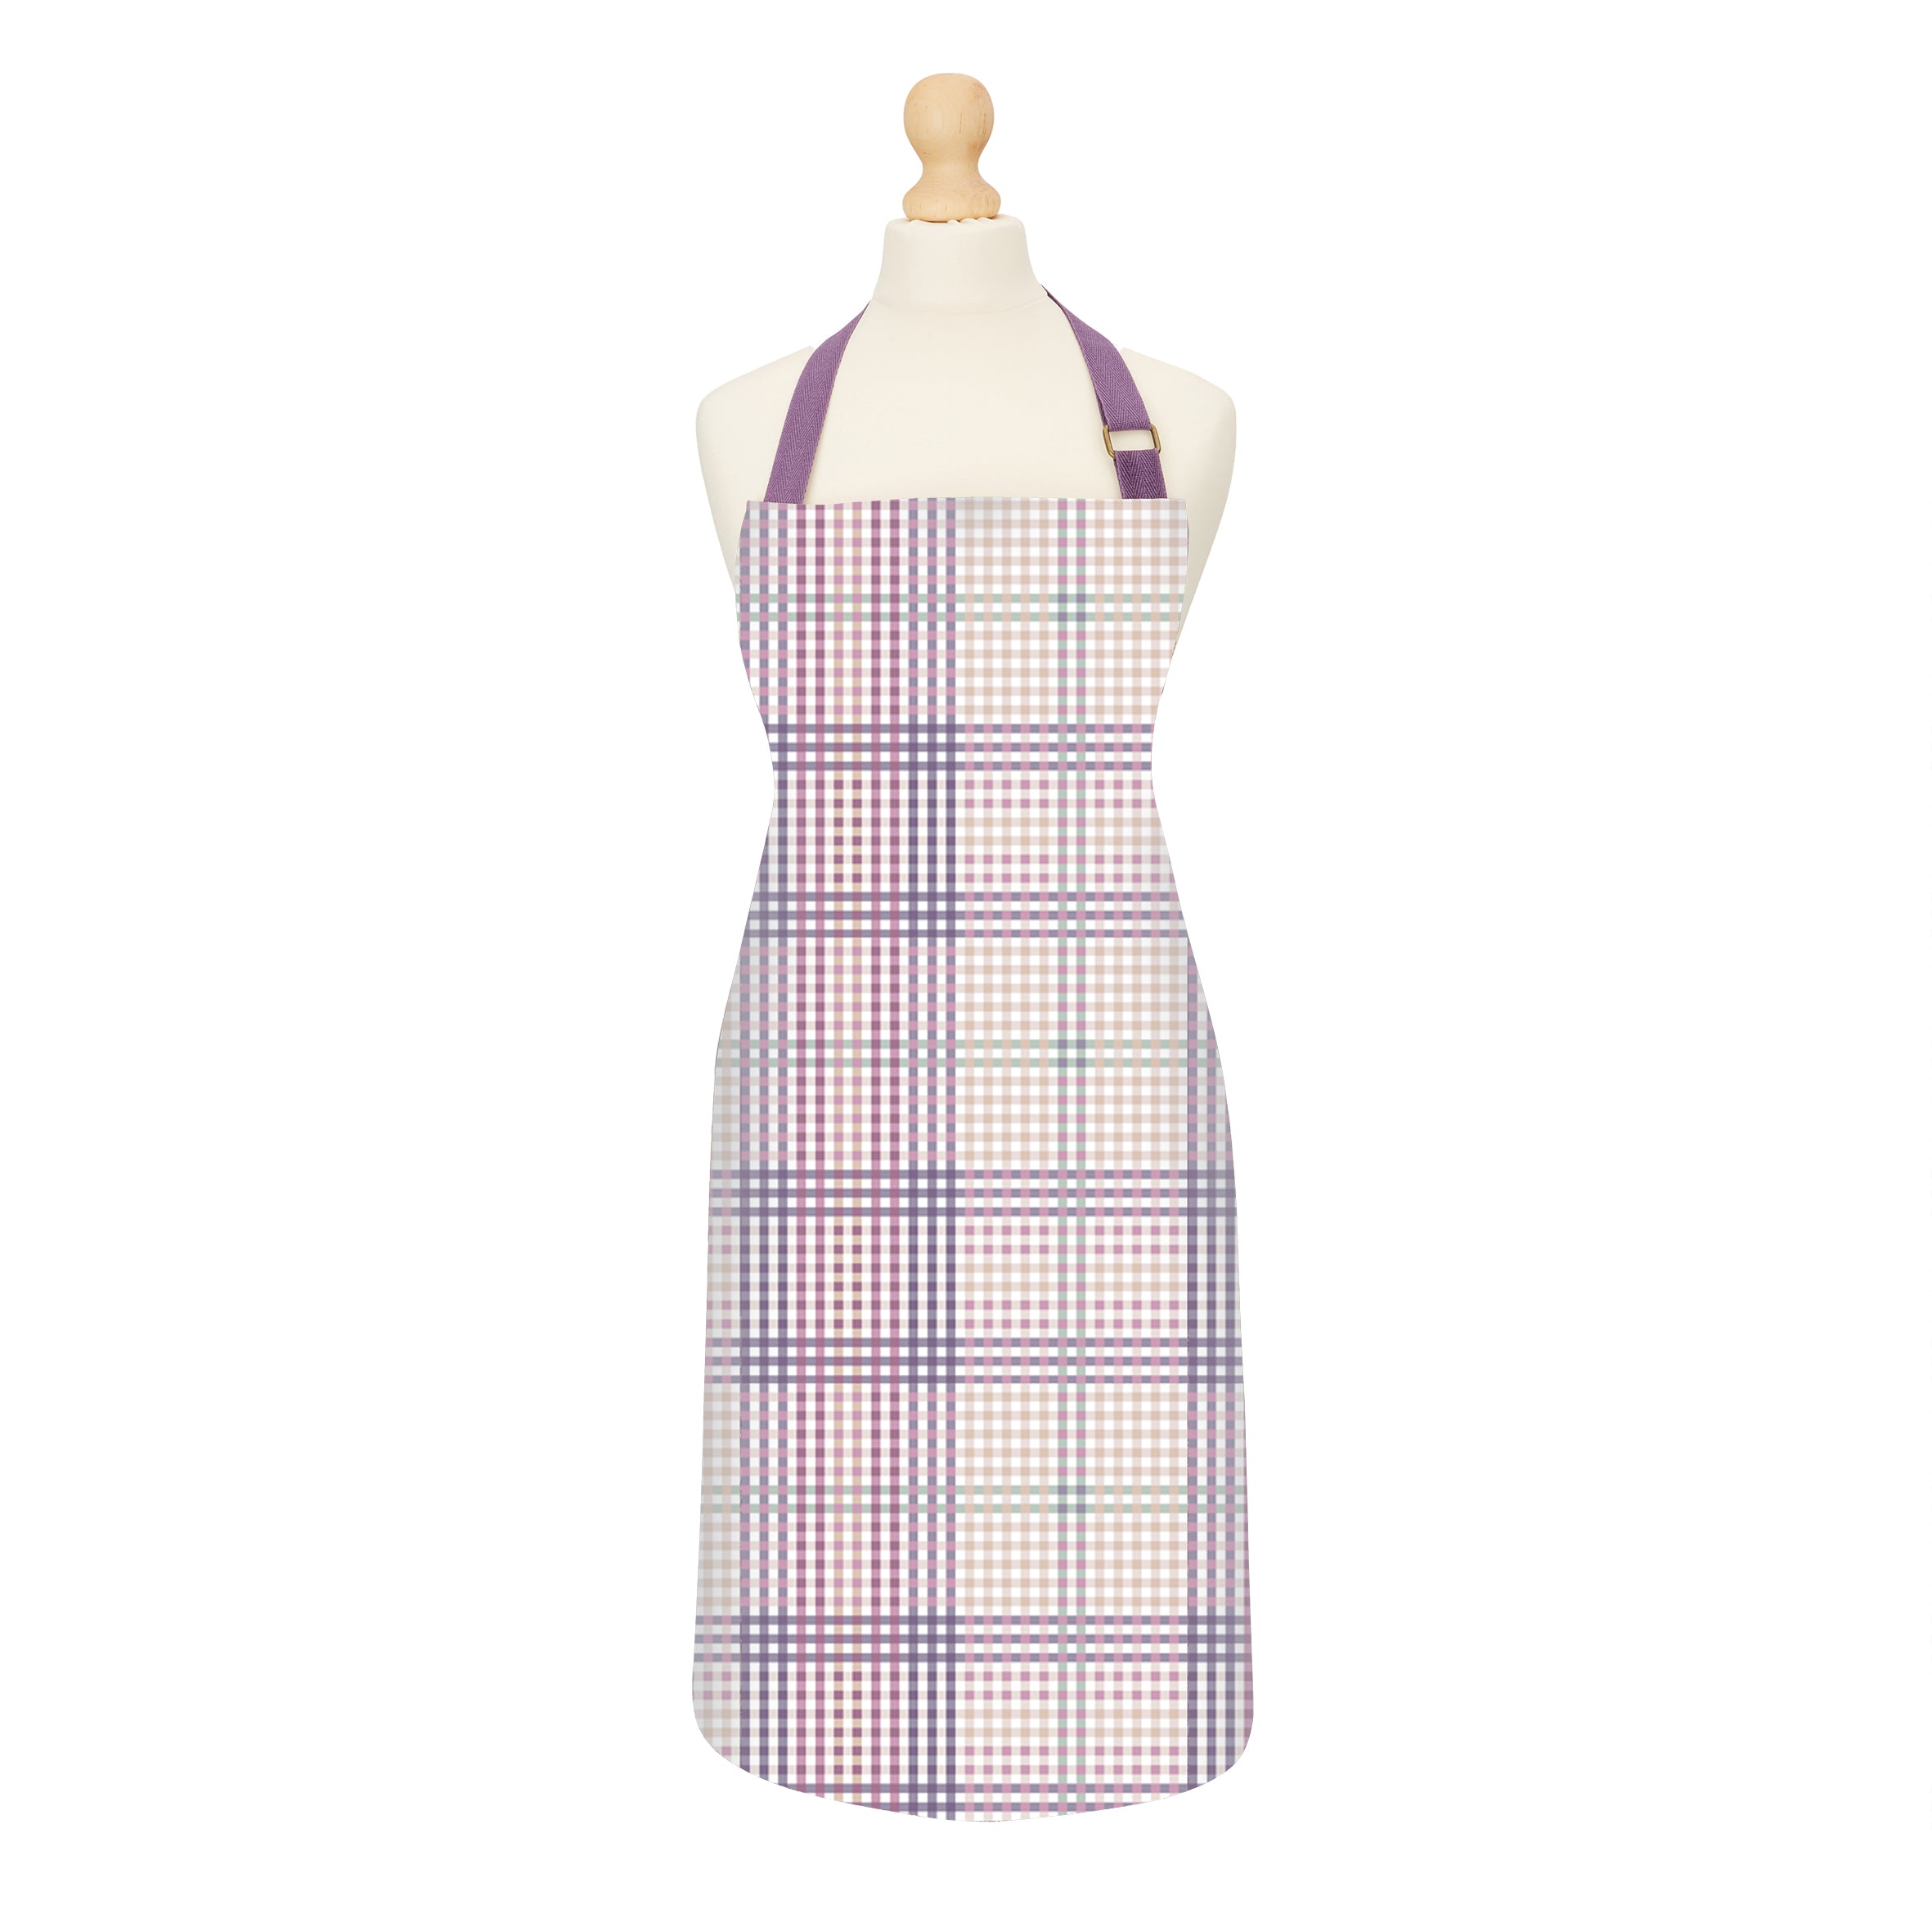 Ulster Weavers Cotton Apron - Mourne Heather Check Purple - Apron - Ulster Weavers